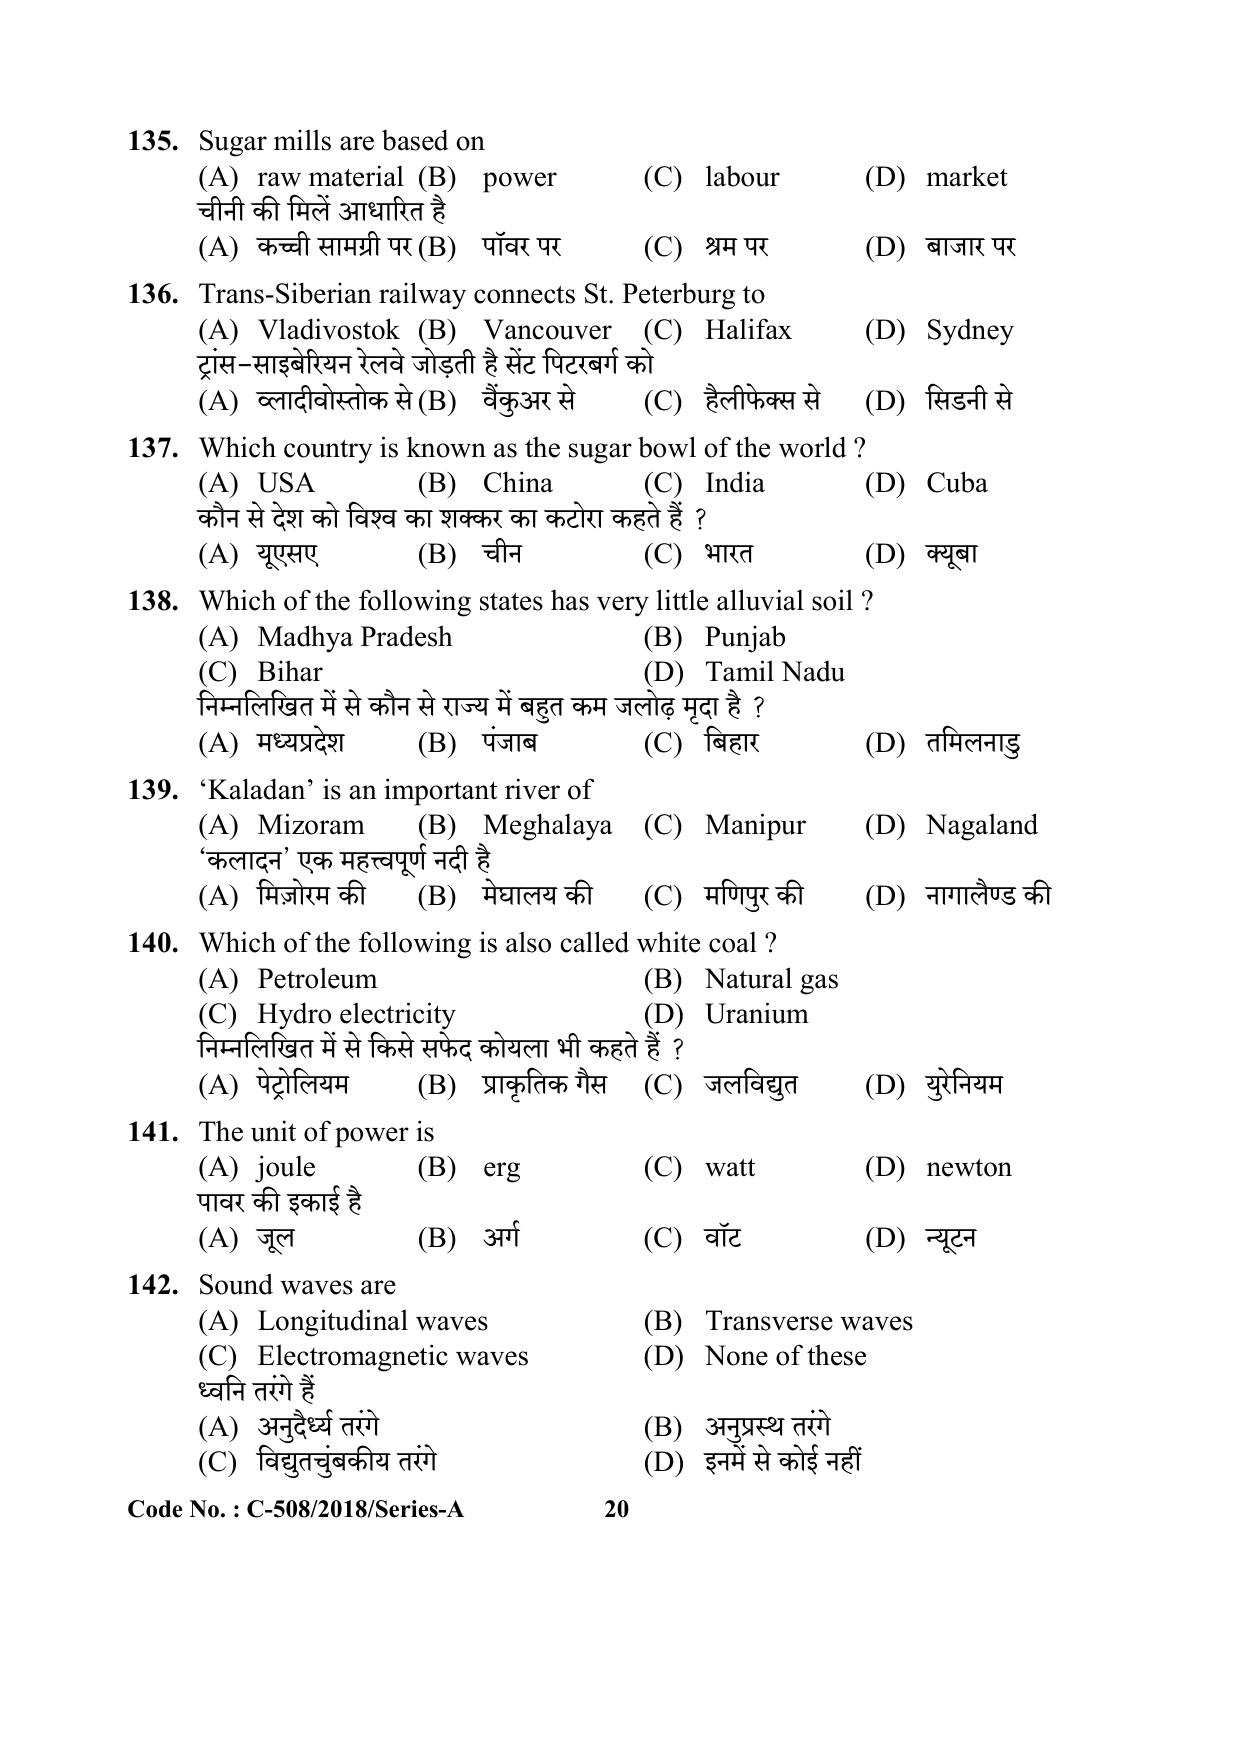 UP Health Worker Thematic Knowledge Previous Year Question Paper - Page 20